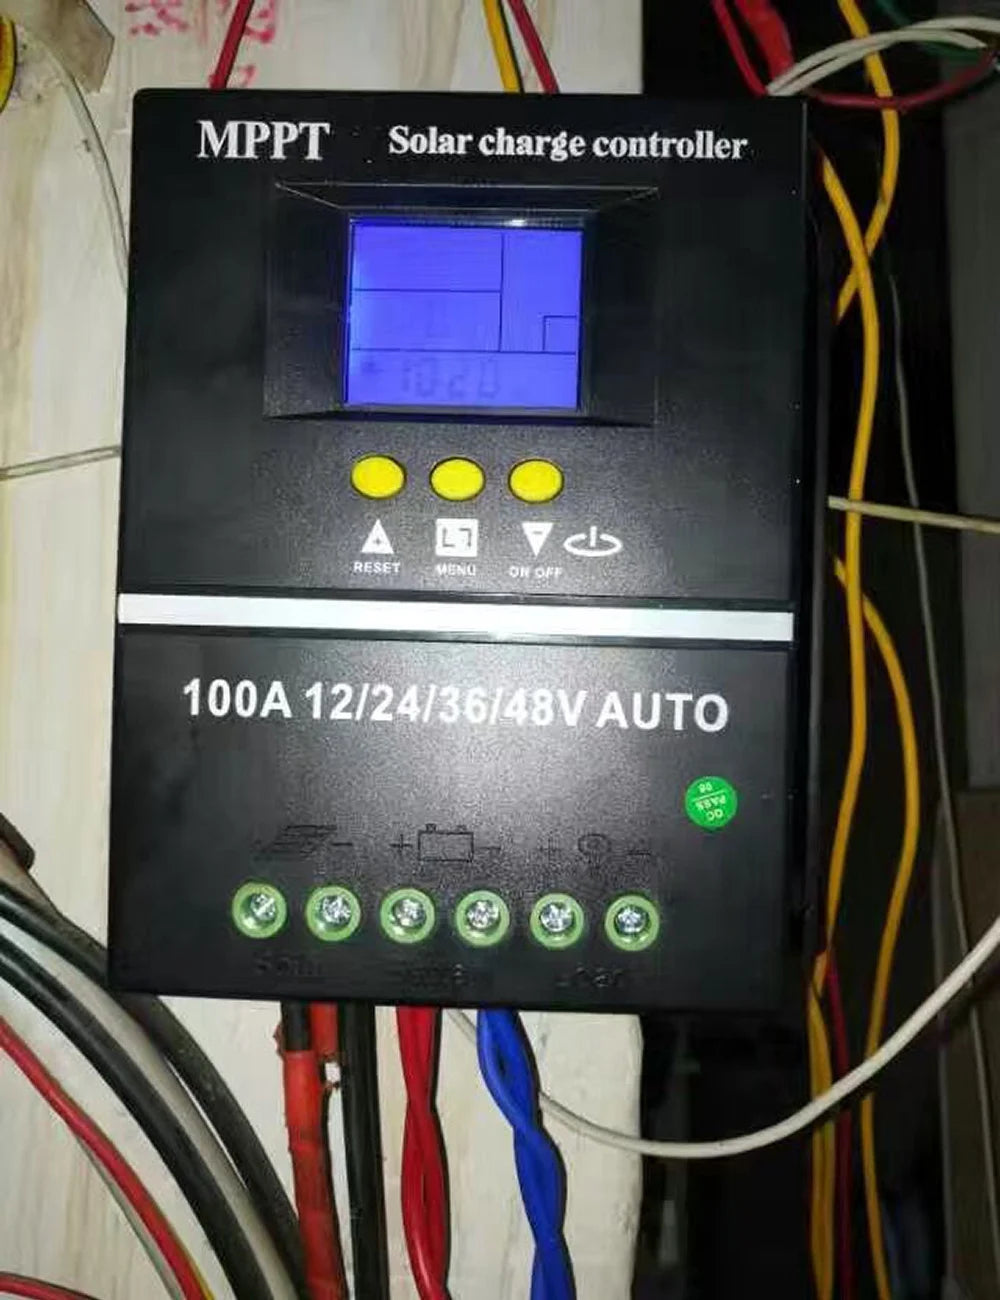 100A/80A/60A MPPT/PWM Solar Charge Controller, Solar Charge Controller for 12V to 48V Systems with Auto Reset and Menu Options.